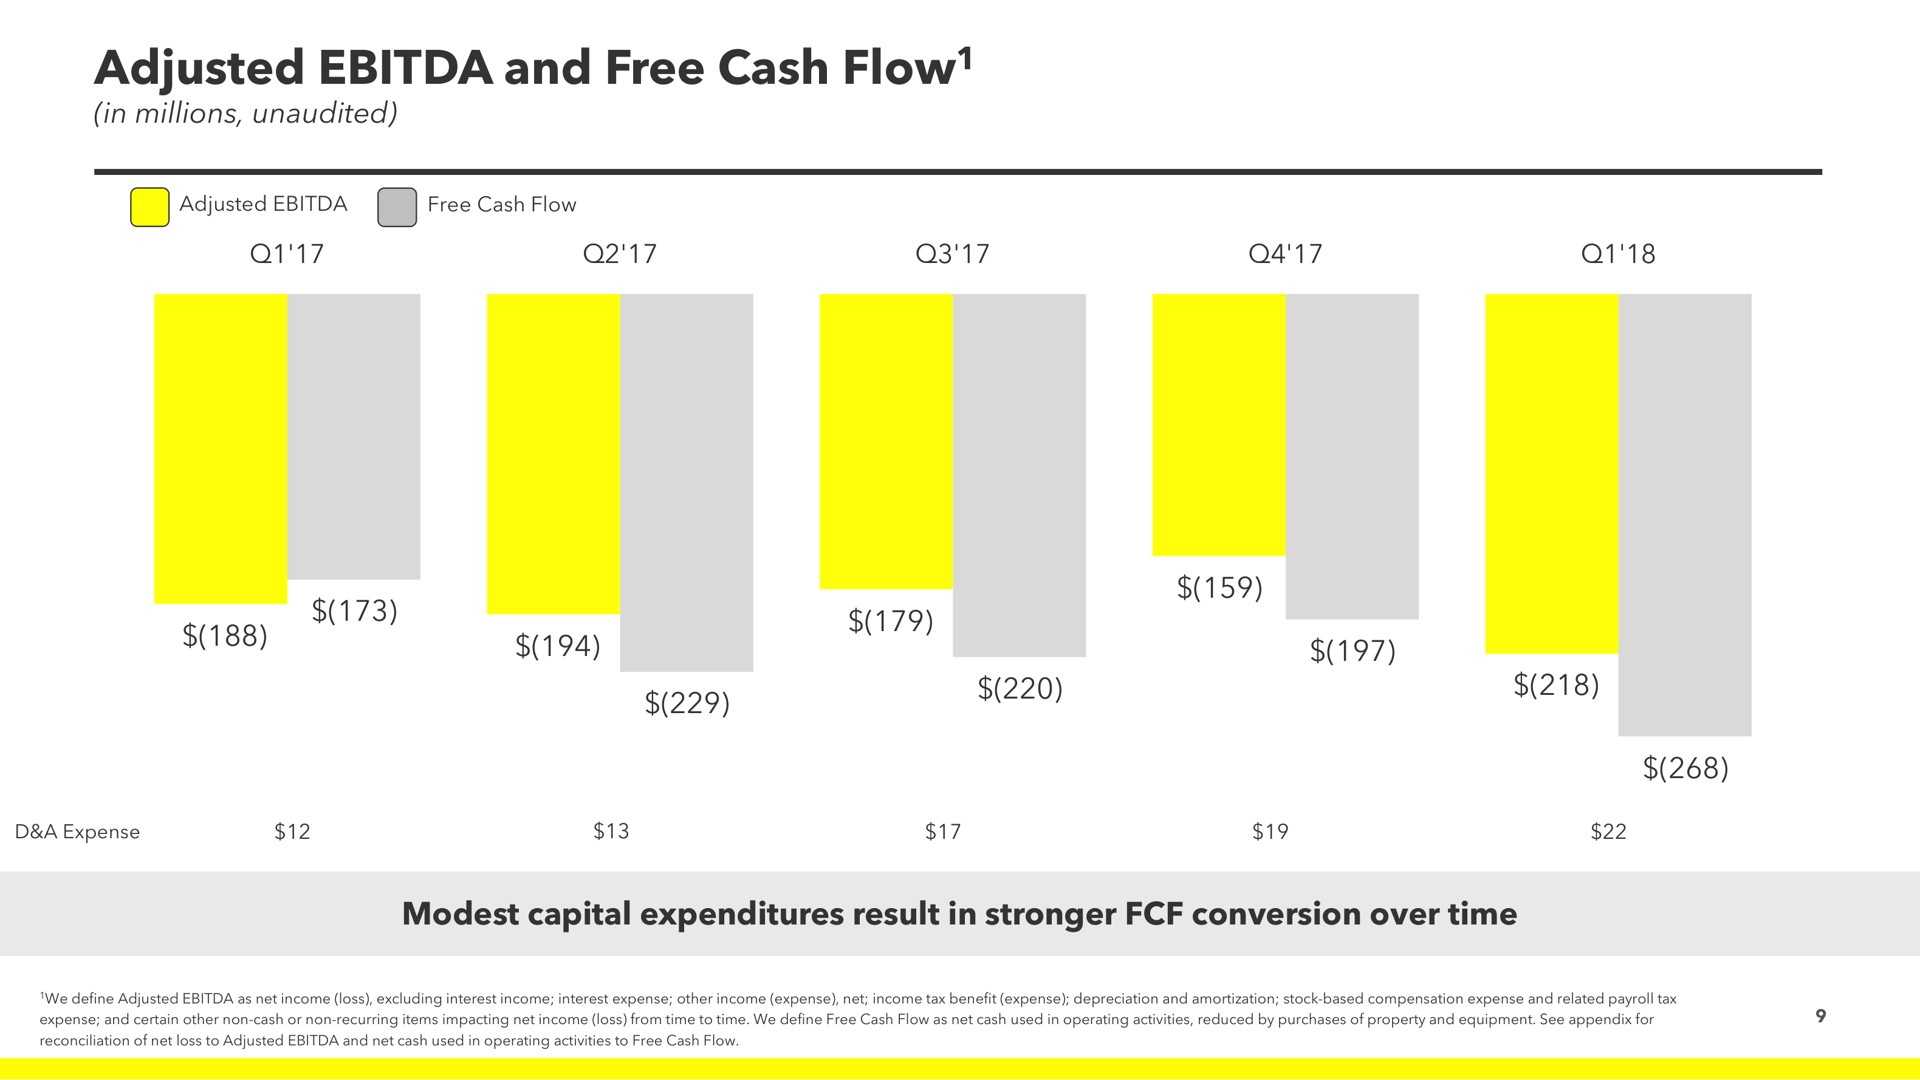 adjusted and free cash flow modest capital expenditures result in conversion over time flow ode | Snap Inc